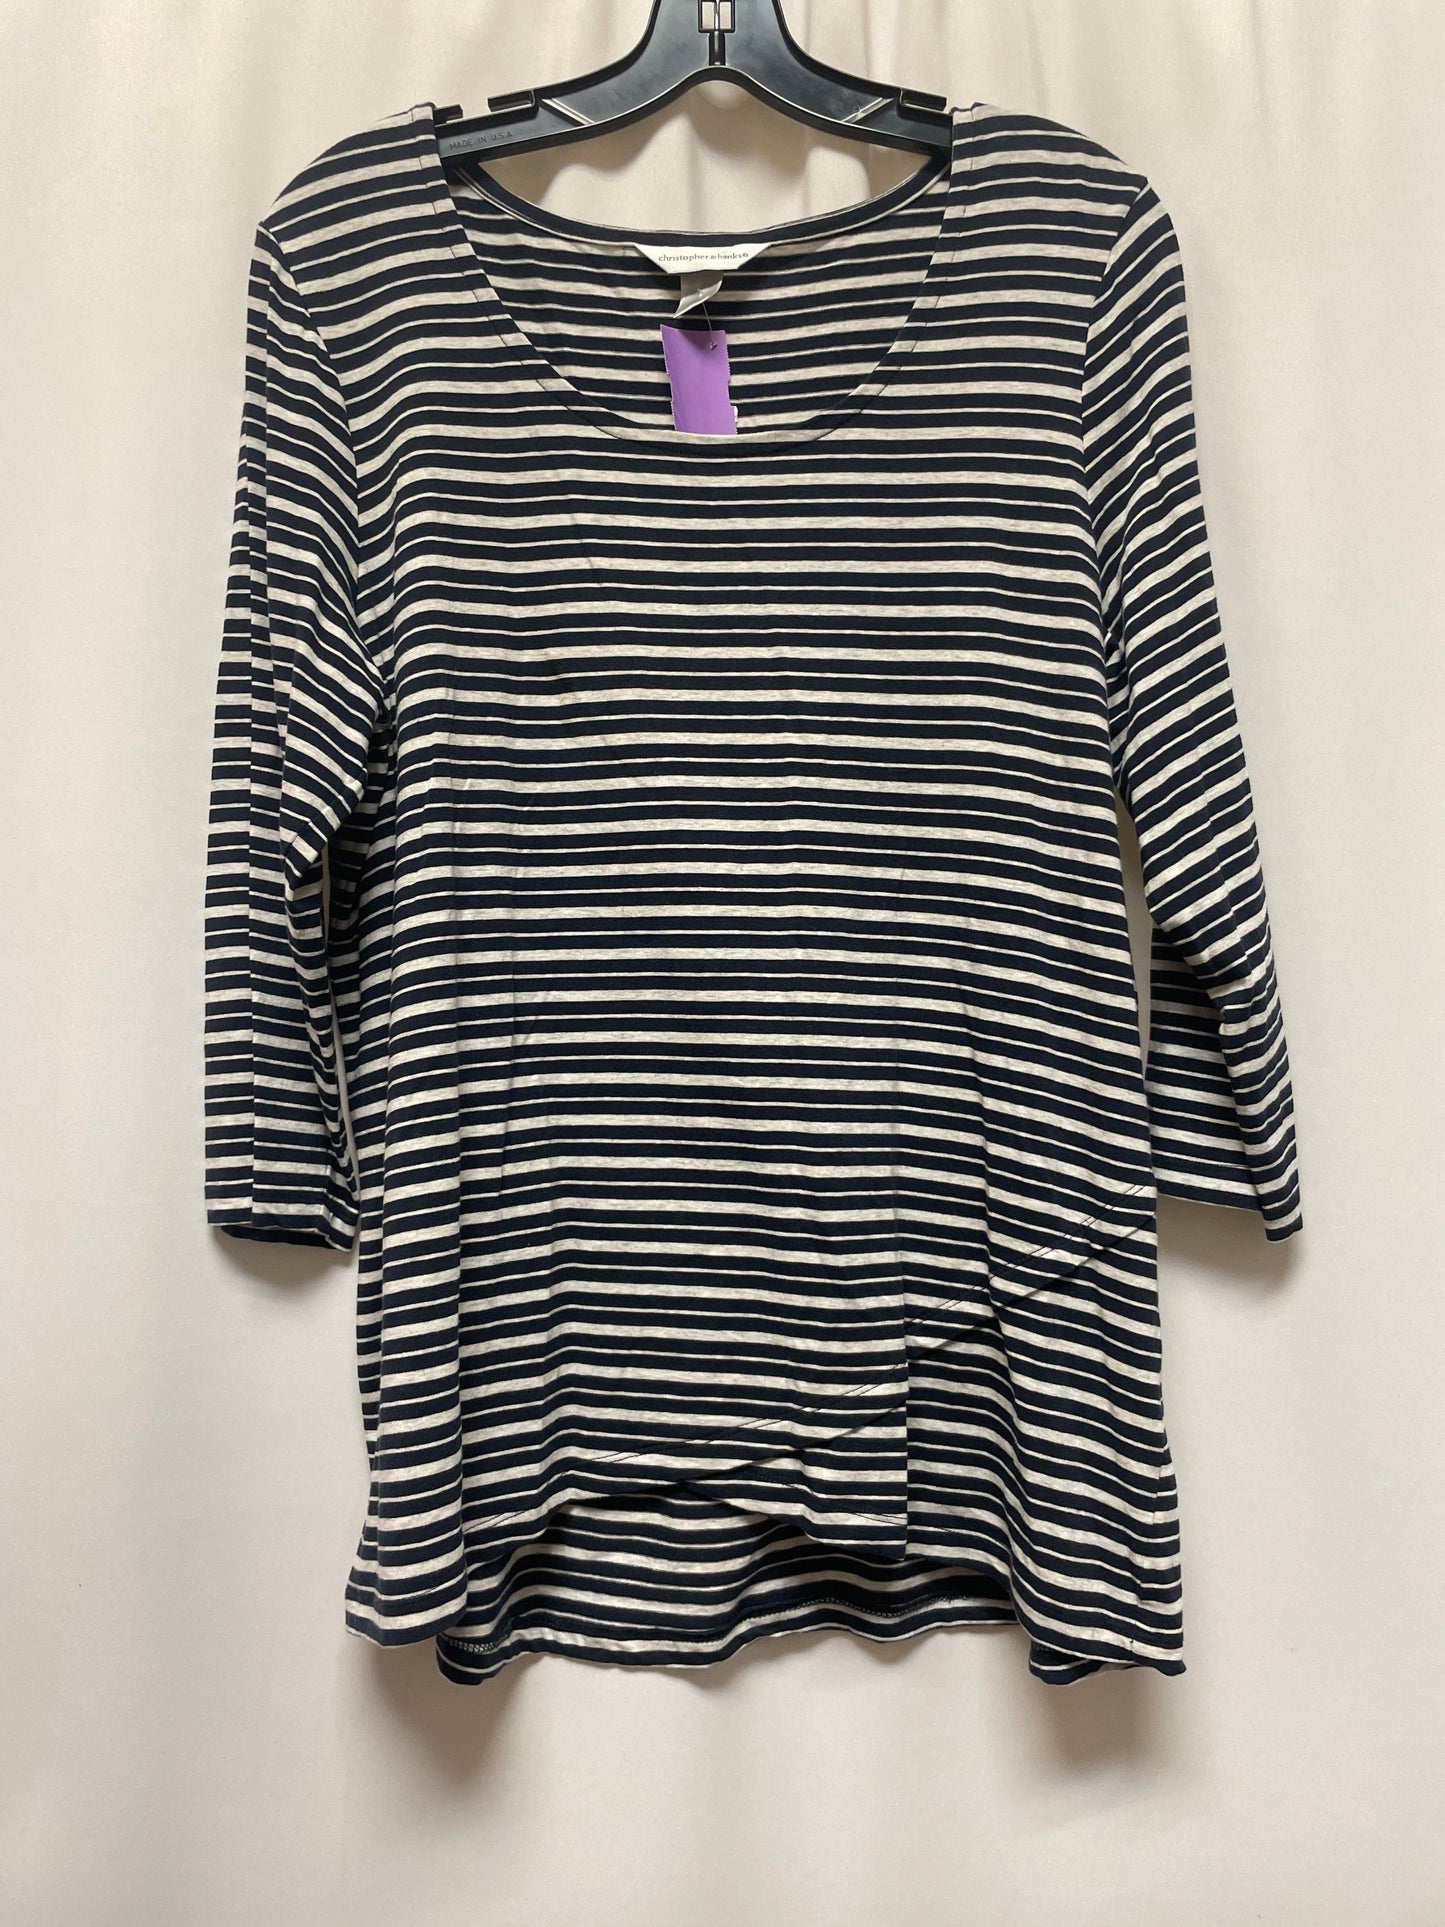 Navy Top Long Sleeve Christopher And Banks, Size L